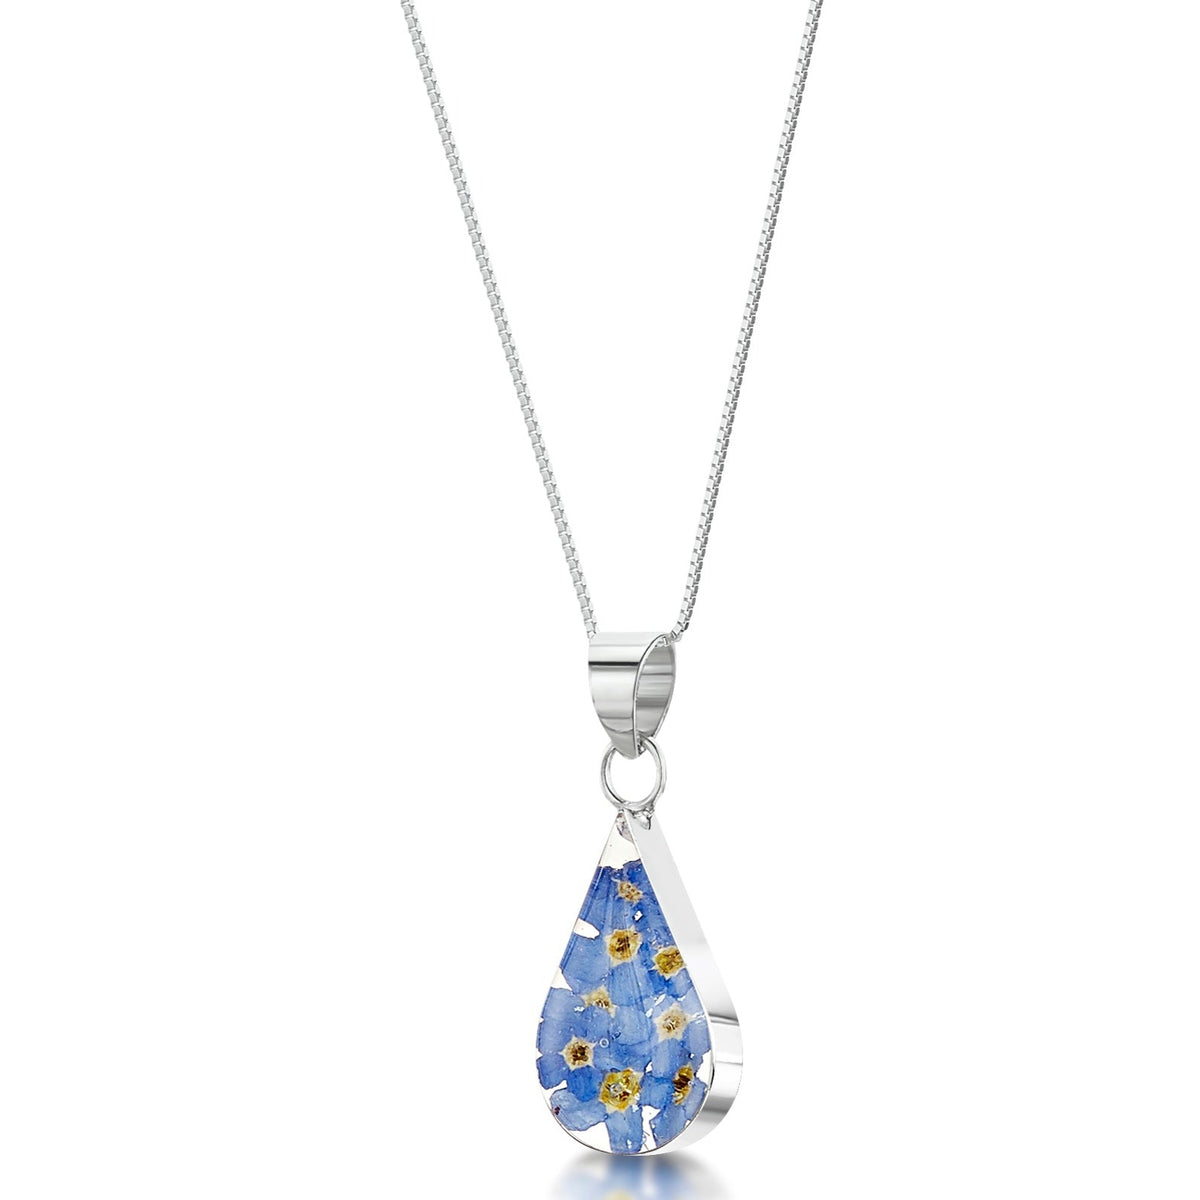 Sterling silver teardrop pendant with real forget-me-not flowers set in resin. Hangs on an 18 inch adjustable sterling silver chain.